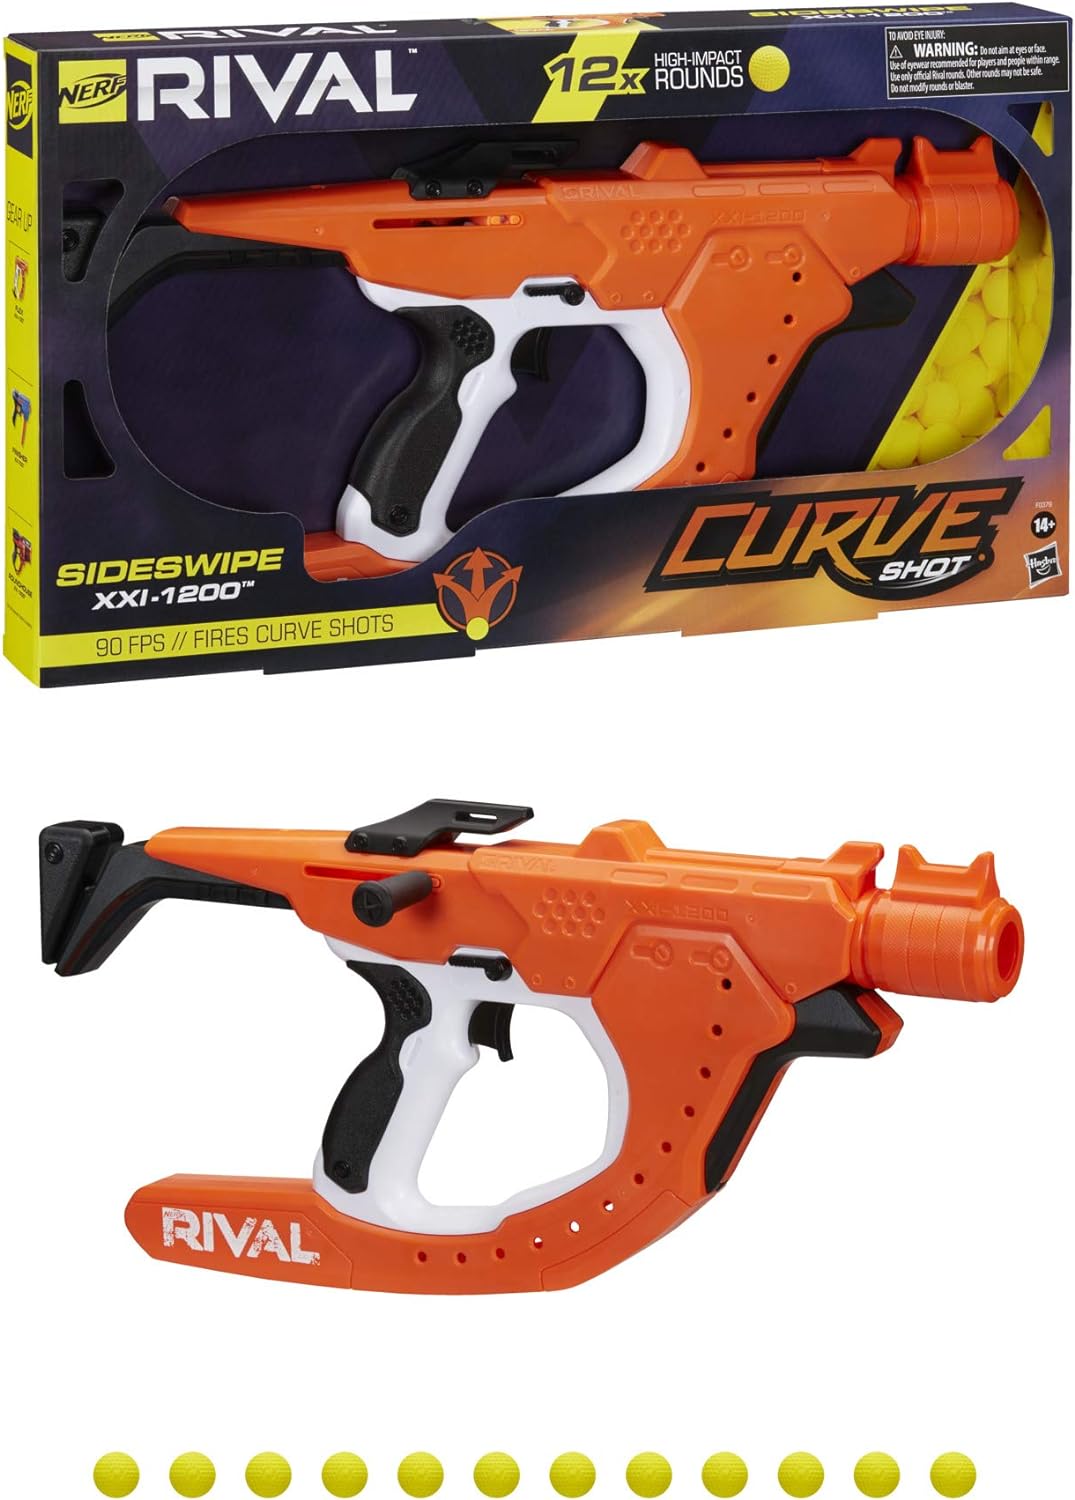 NERF Rival Curve Shot Sideswipe XXI-1200 Blaster Fire Rounds to Curve Left, Right, Downward or Fire Straight 12 Rival Rounds